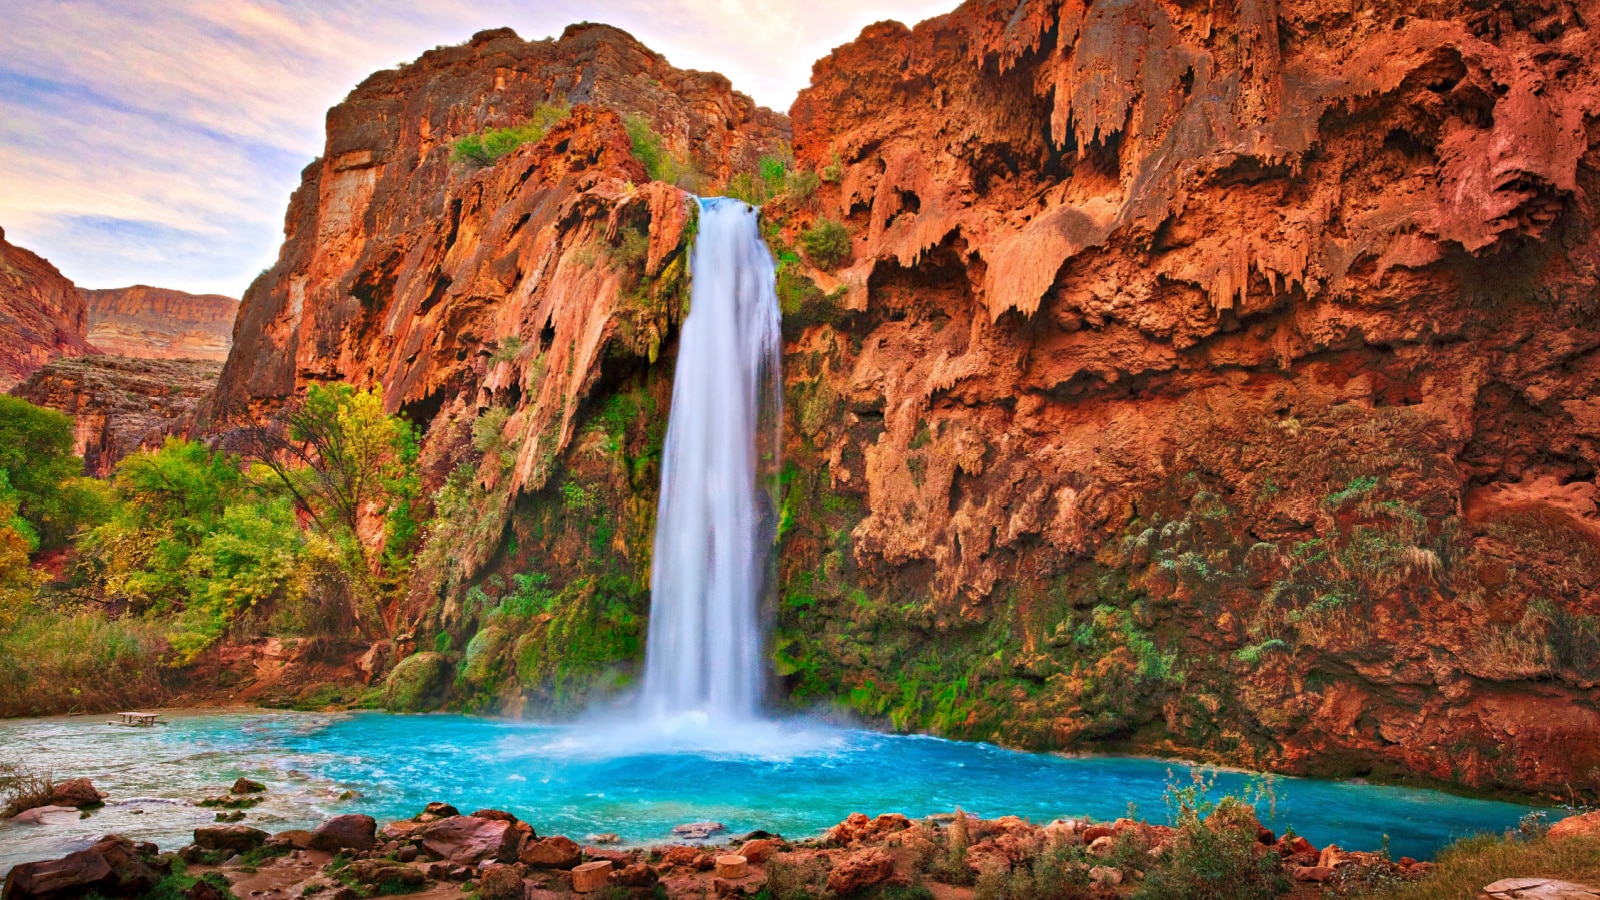 <p>Havasu Falls is a stunning and iconic waterfall located in the Havasupai Indian Reservation, within the Grand Canyon National Park in Arizona, United States. It is known for its crystal-clear turquoise blue waters, cascading over vivid red rock cliffs, creating a breathtaking sight.</p>